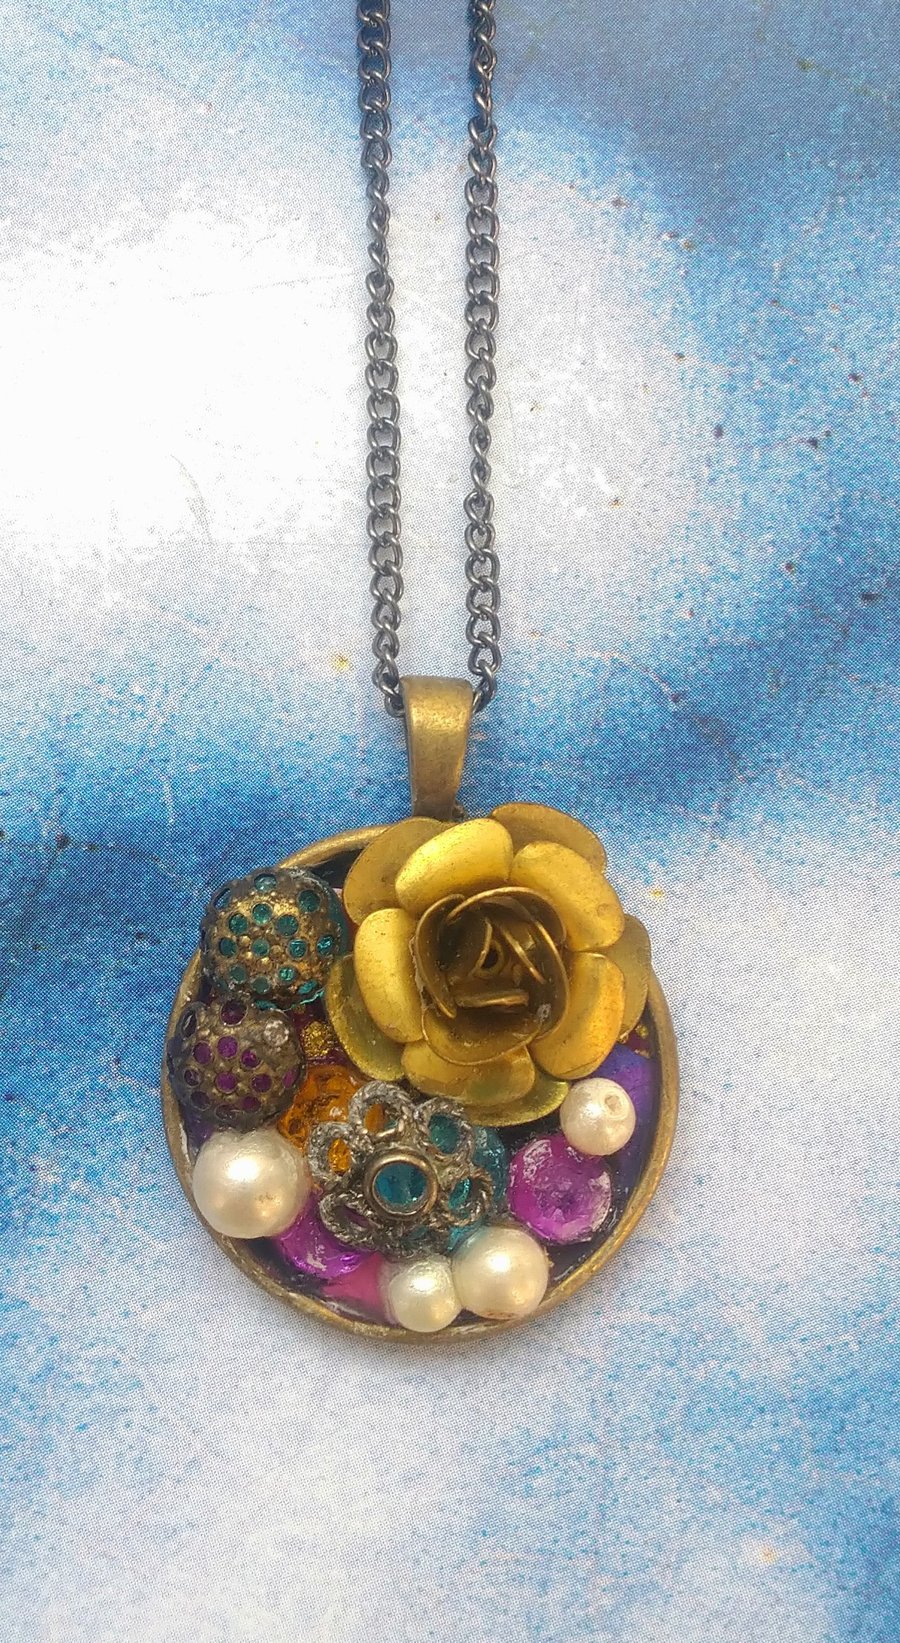 Big Gold Flower in a Bejewelled Pendant